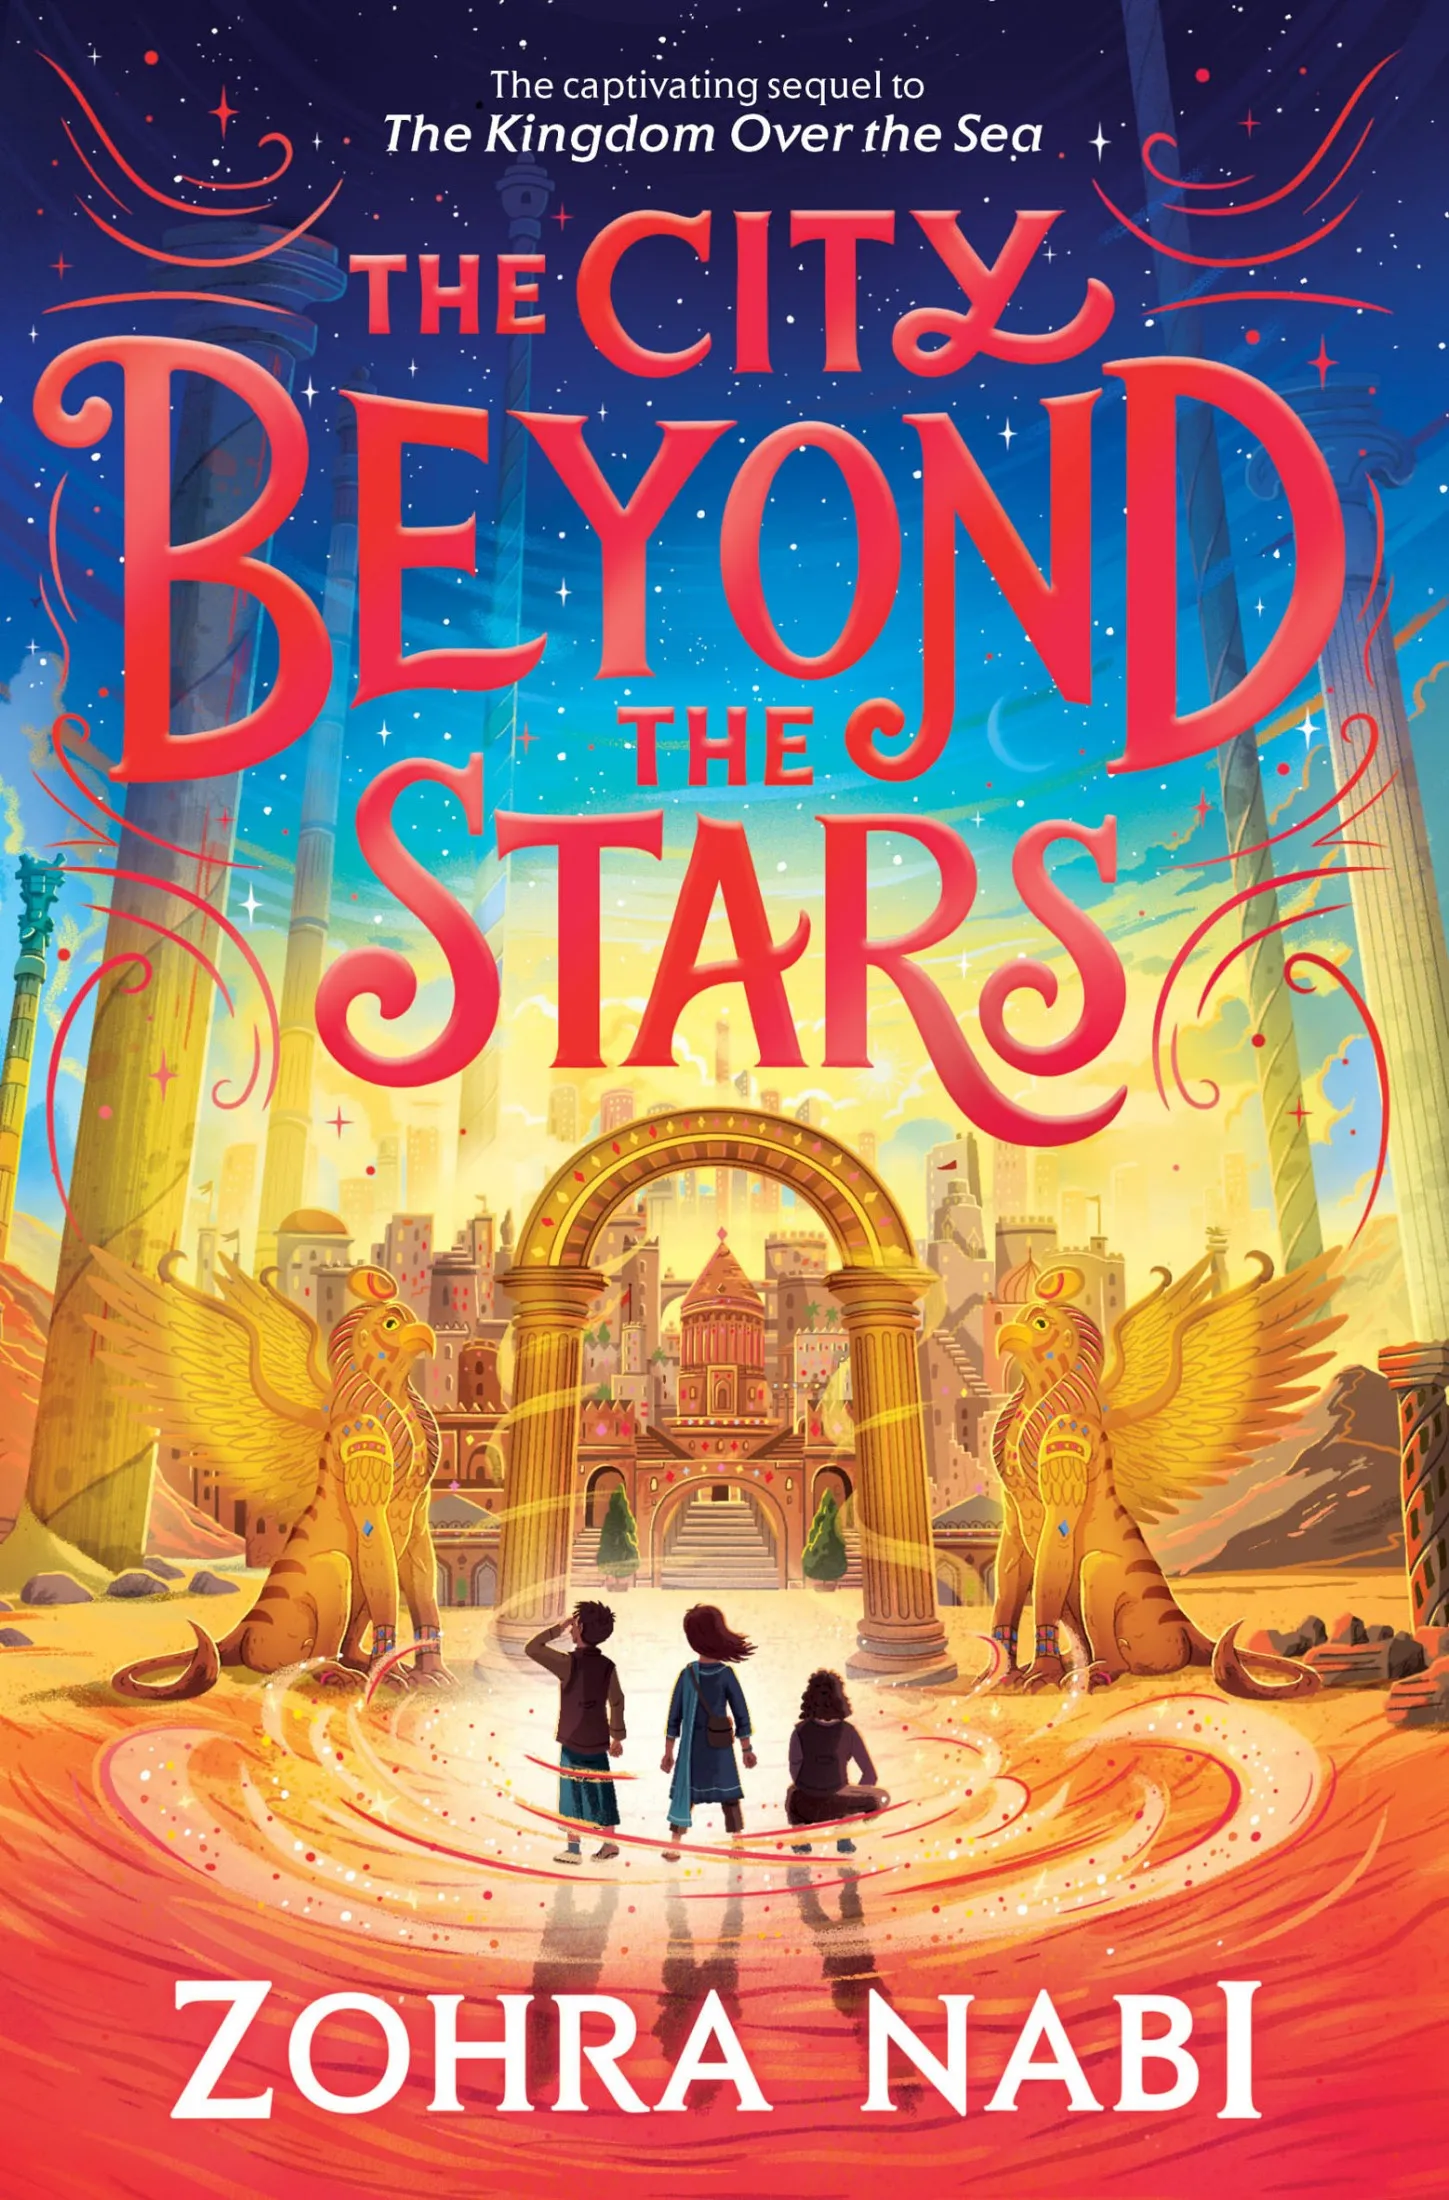 The City Beyond the Stars (The Kingdom Over the Sea #2)